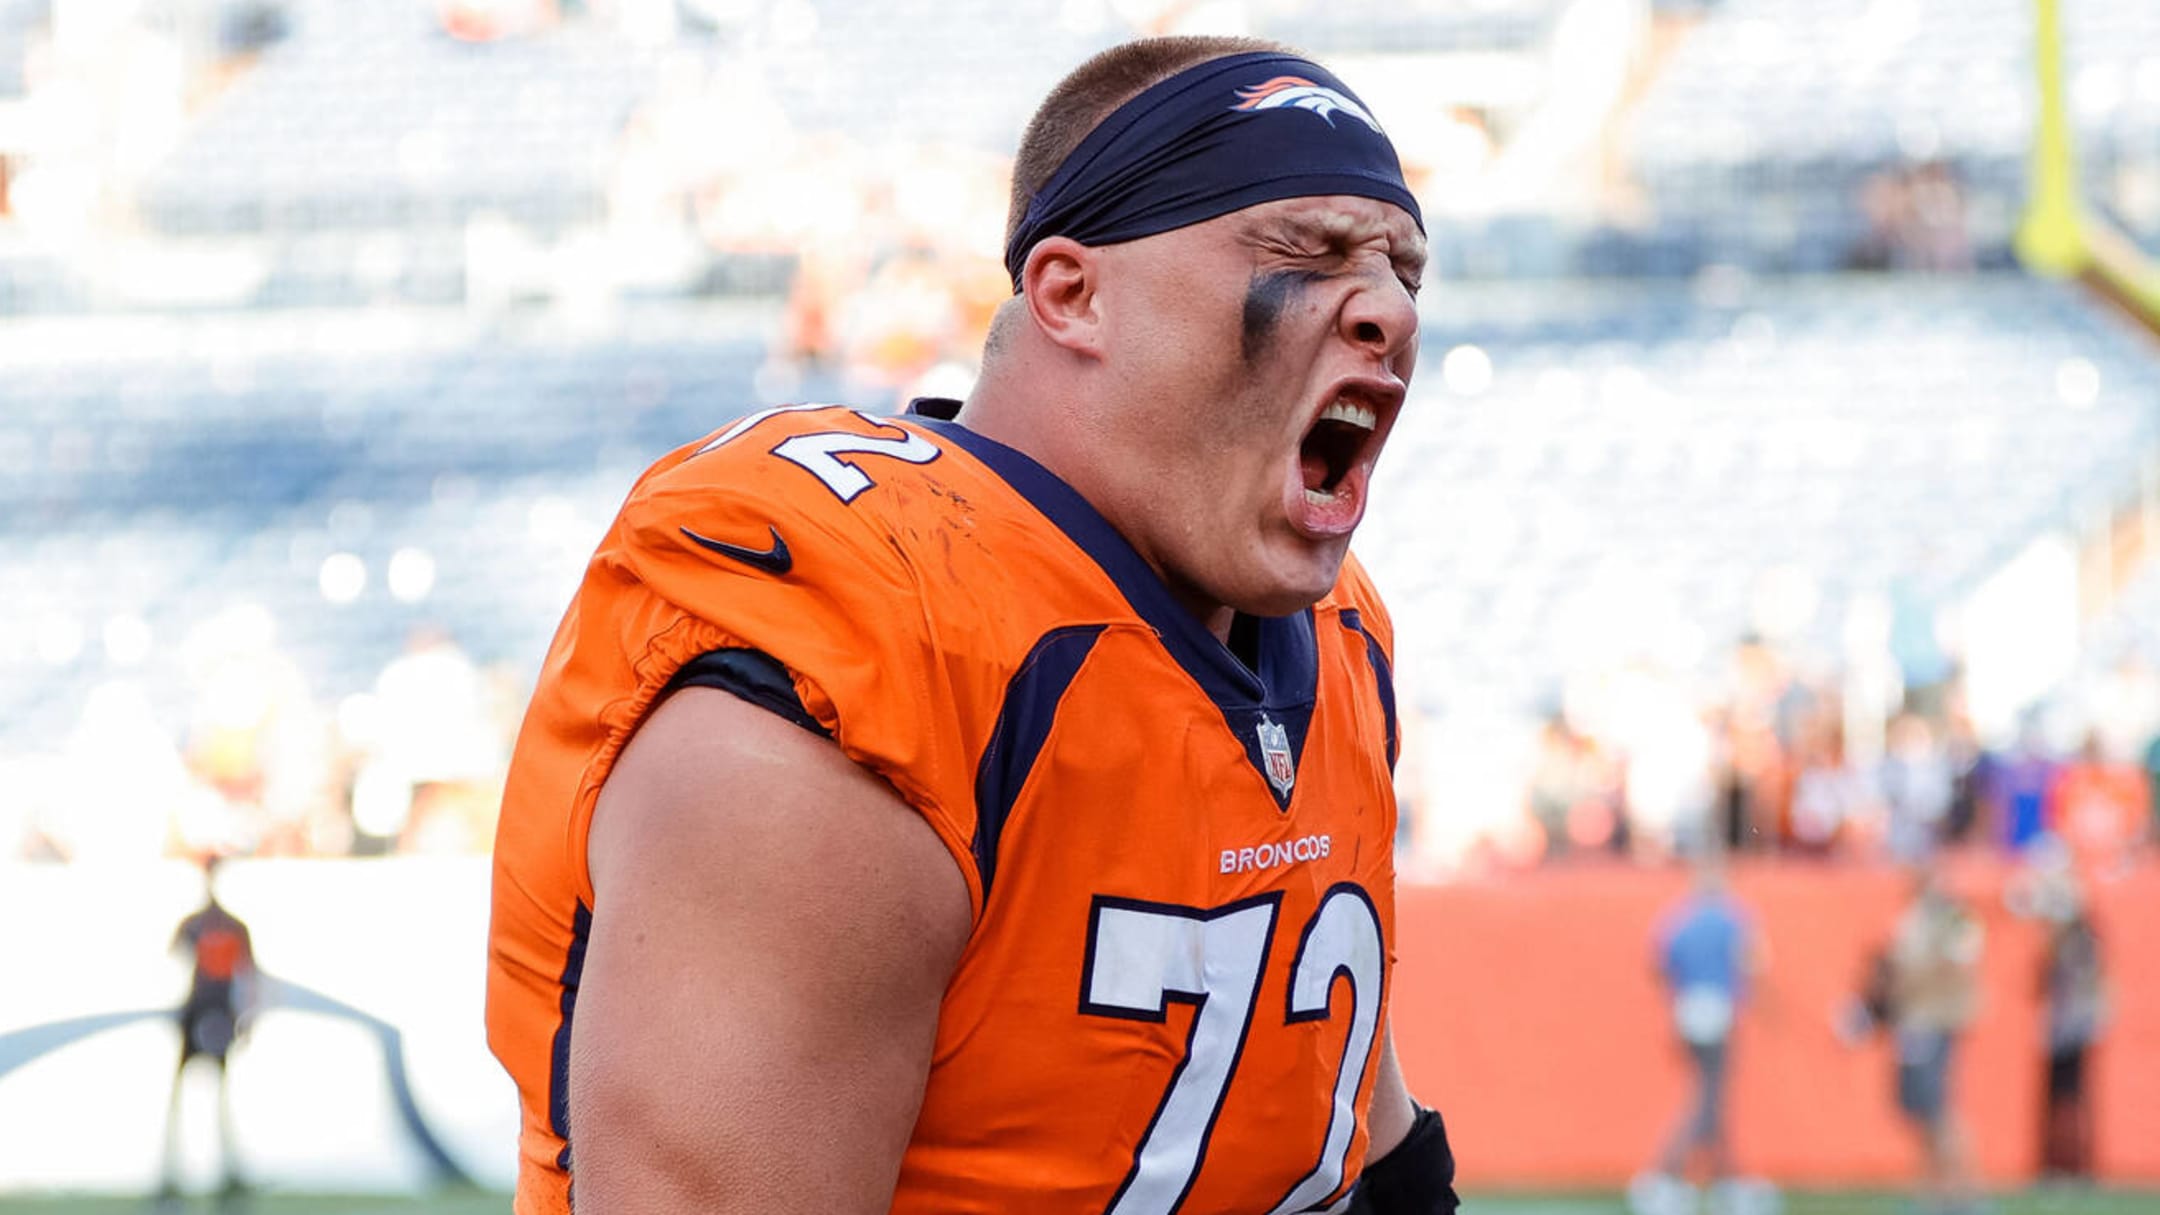 Broncos O-Lineman Goes Viral for Epic Tackle Attempt Fail Vs